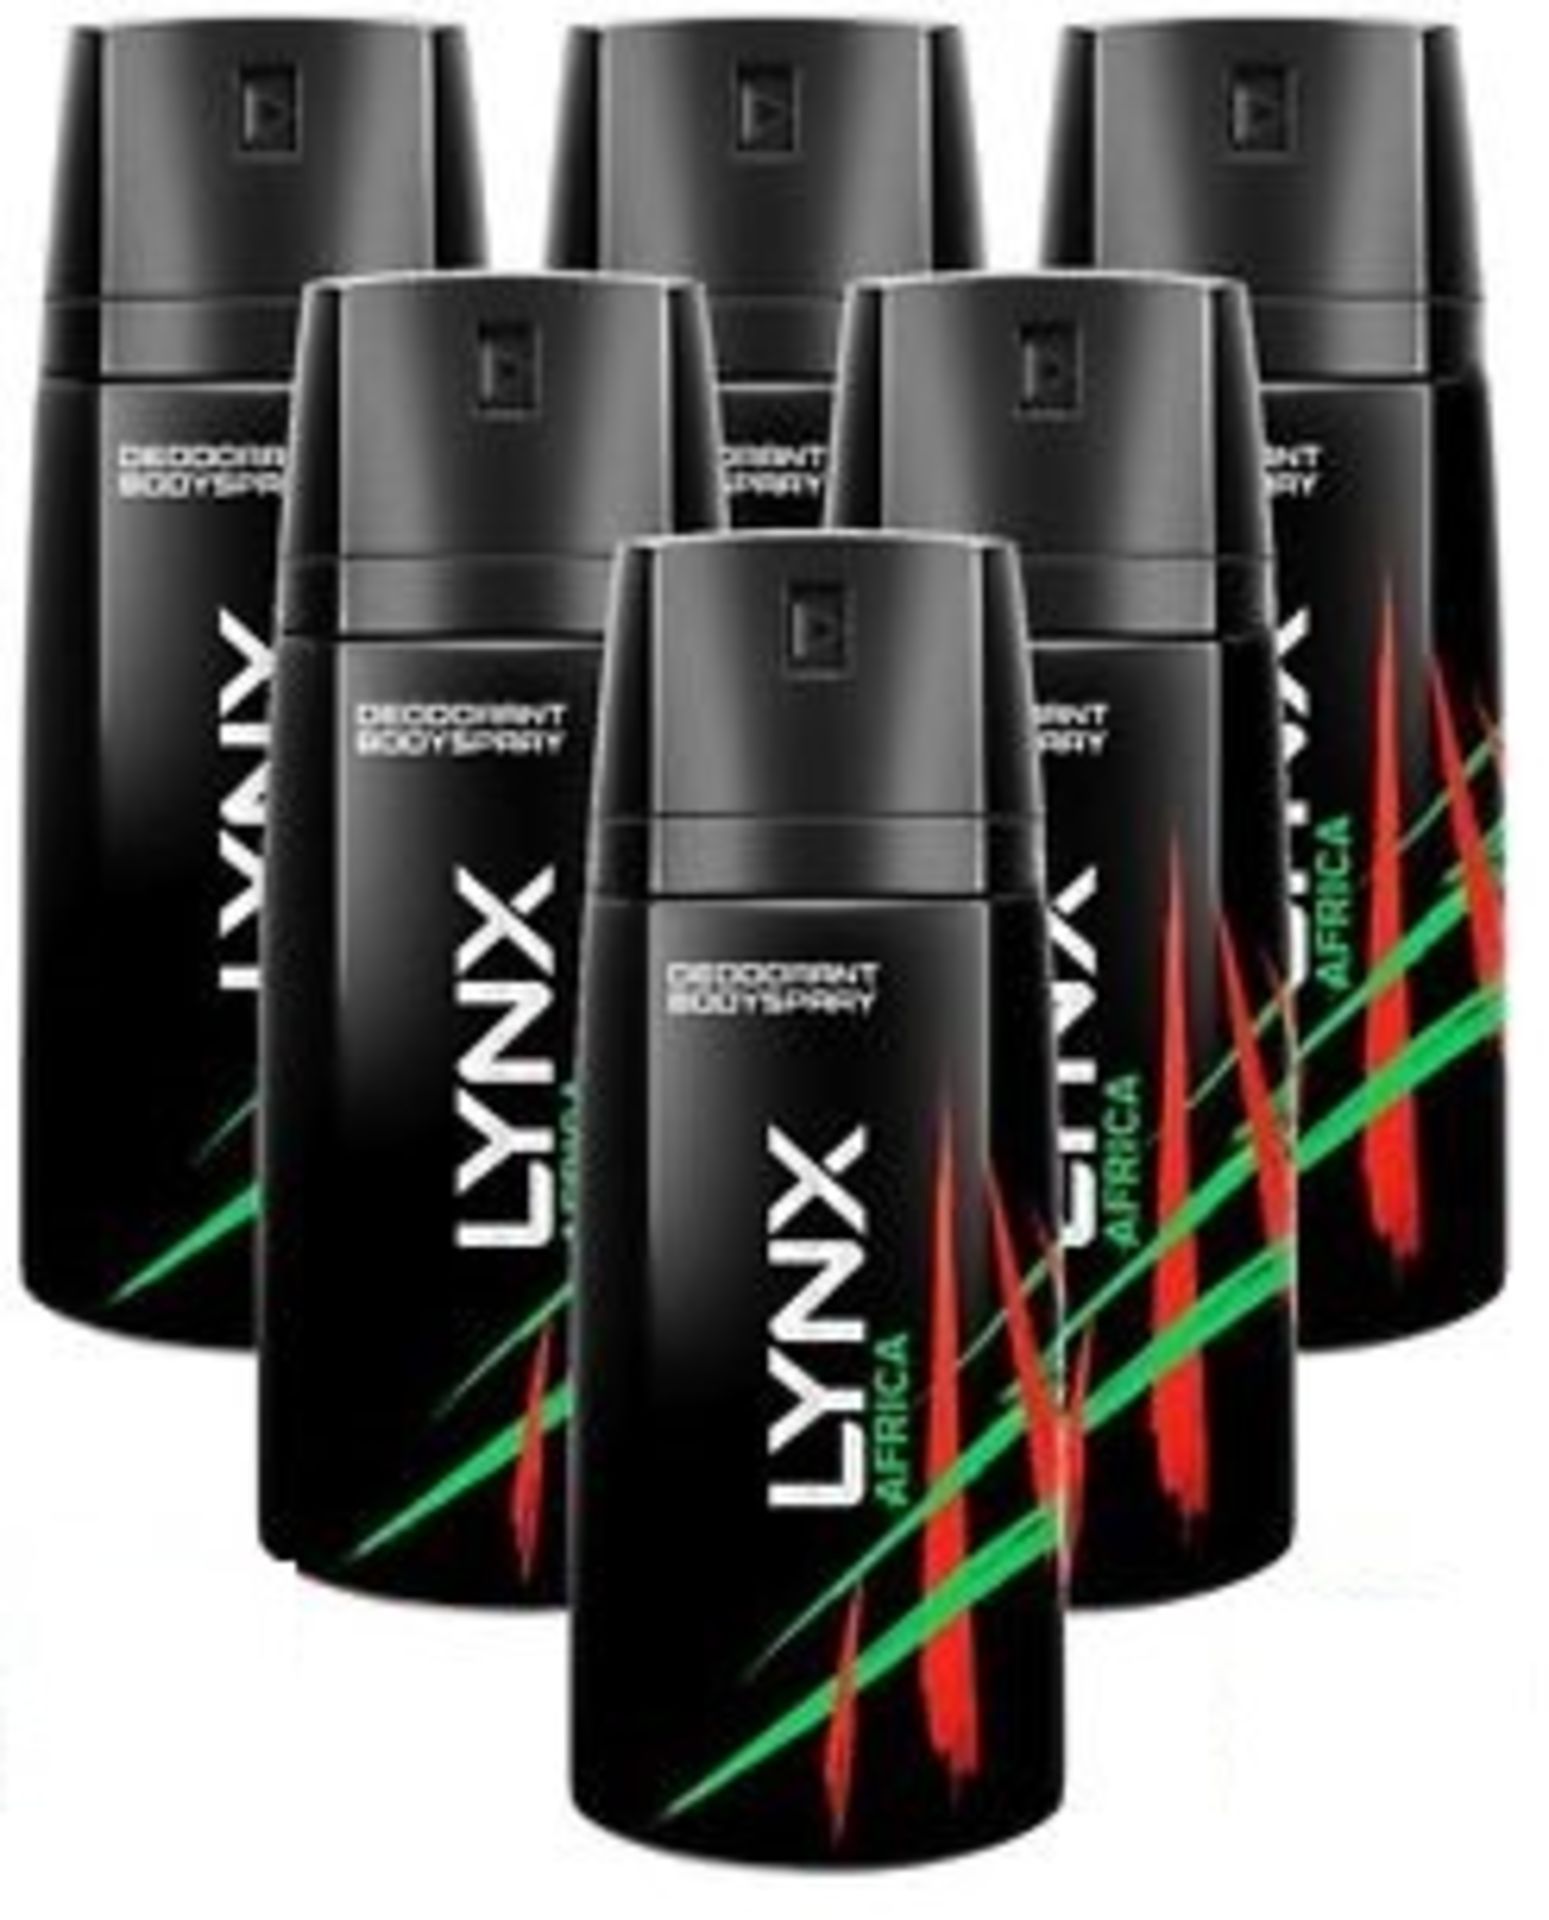 V Brand New 6 x Lynx (Axe) Africa Deodorant Body Spray 150ml Total ISP For 6 £16.74 (Picture shows